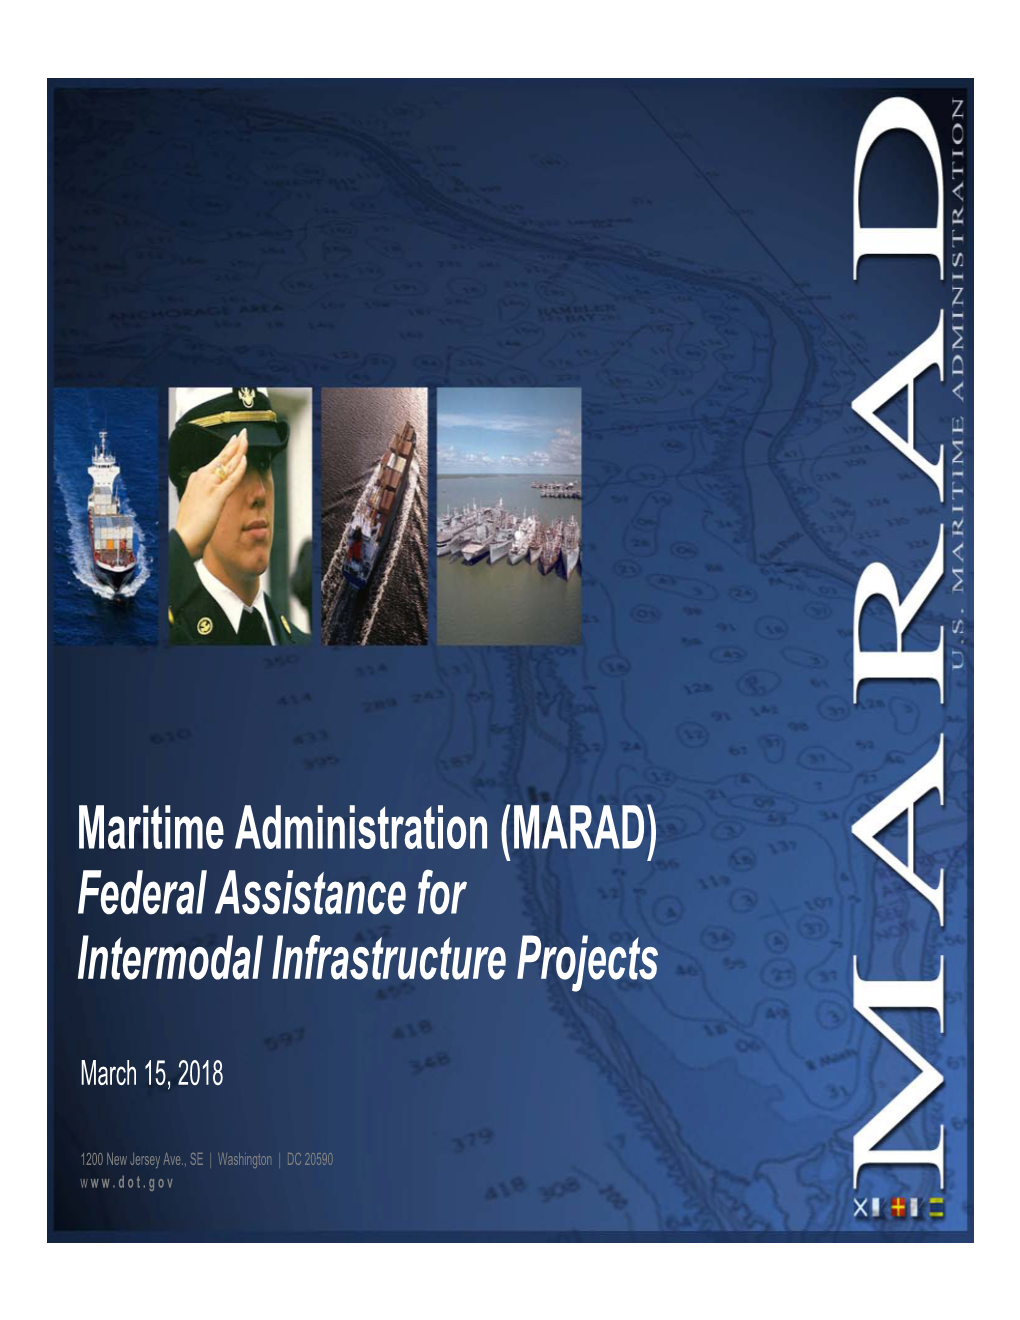 Maritime Administration (MARAD) Federal Assistance for Intermodal Infrastructure Projects